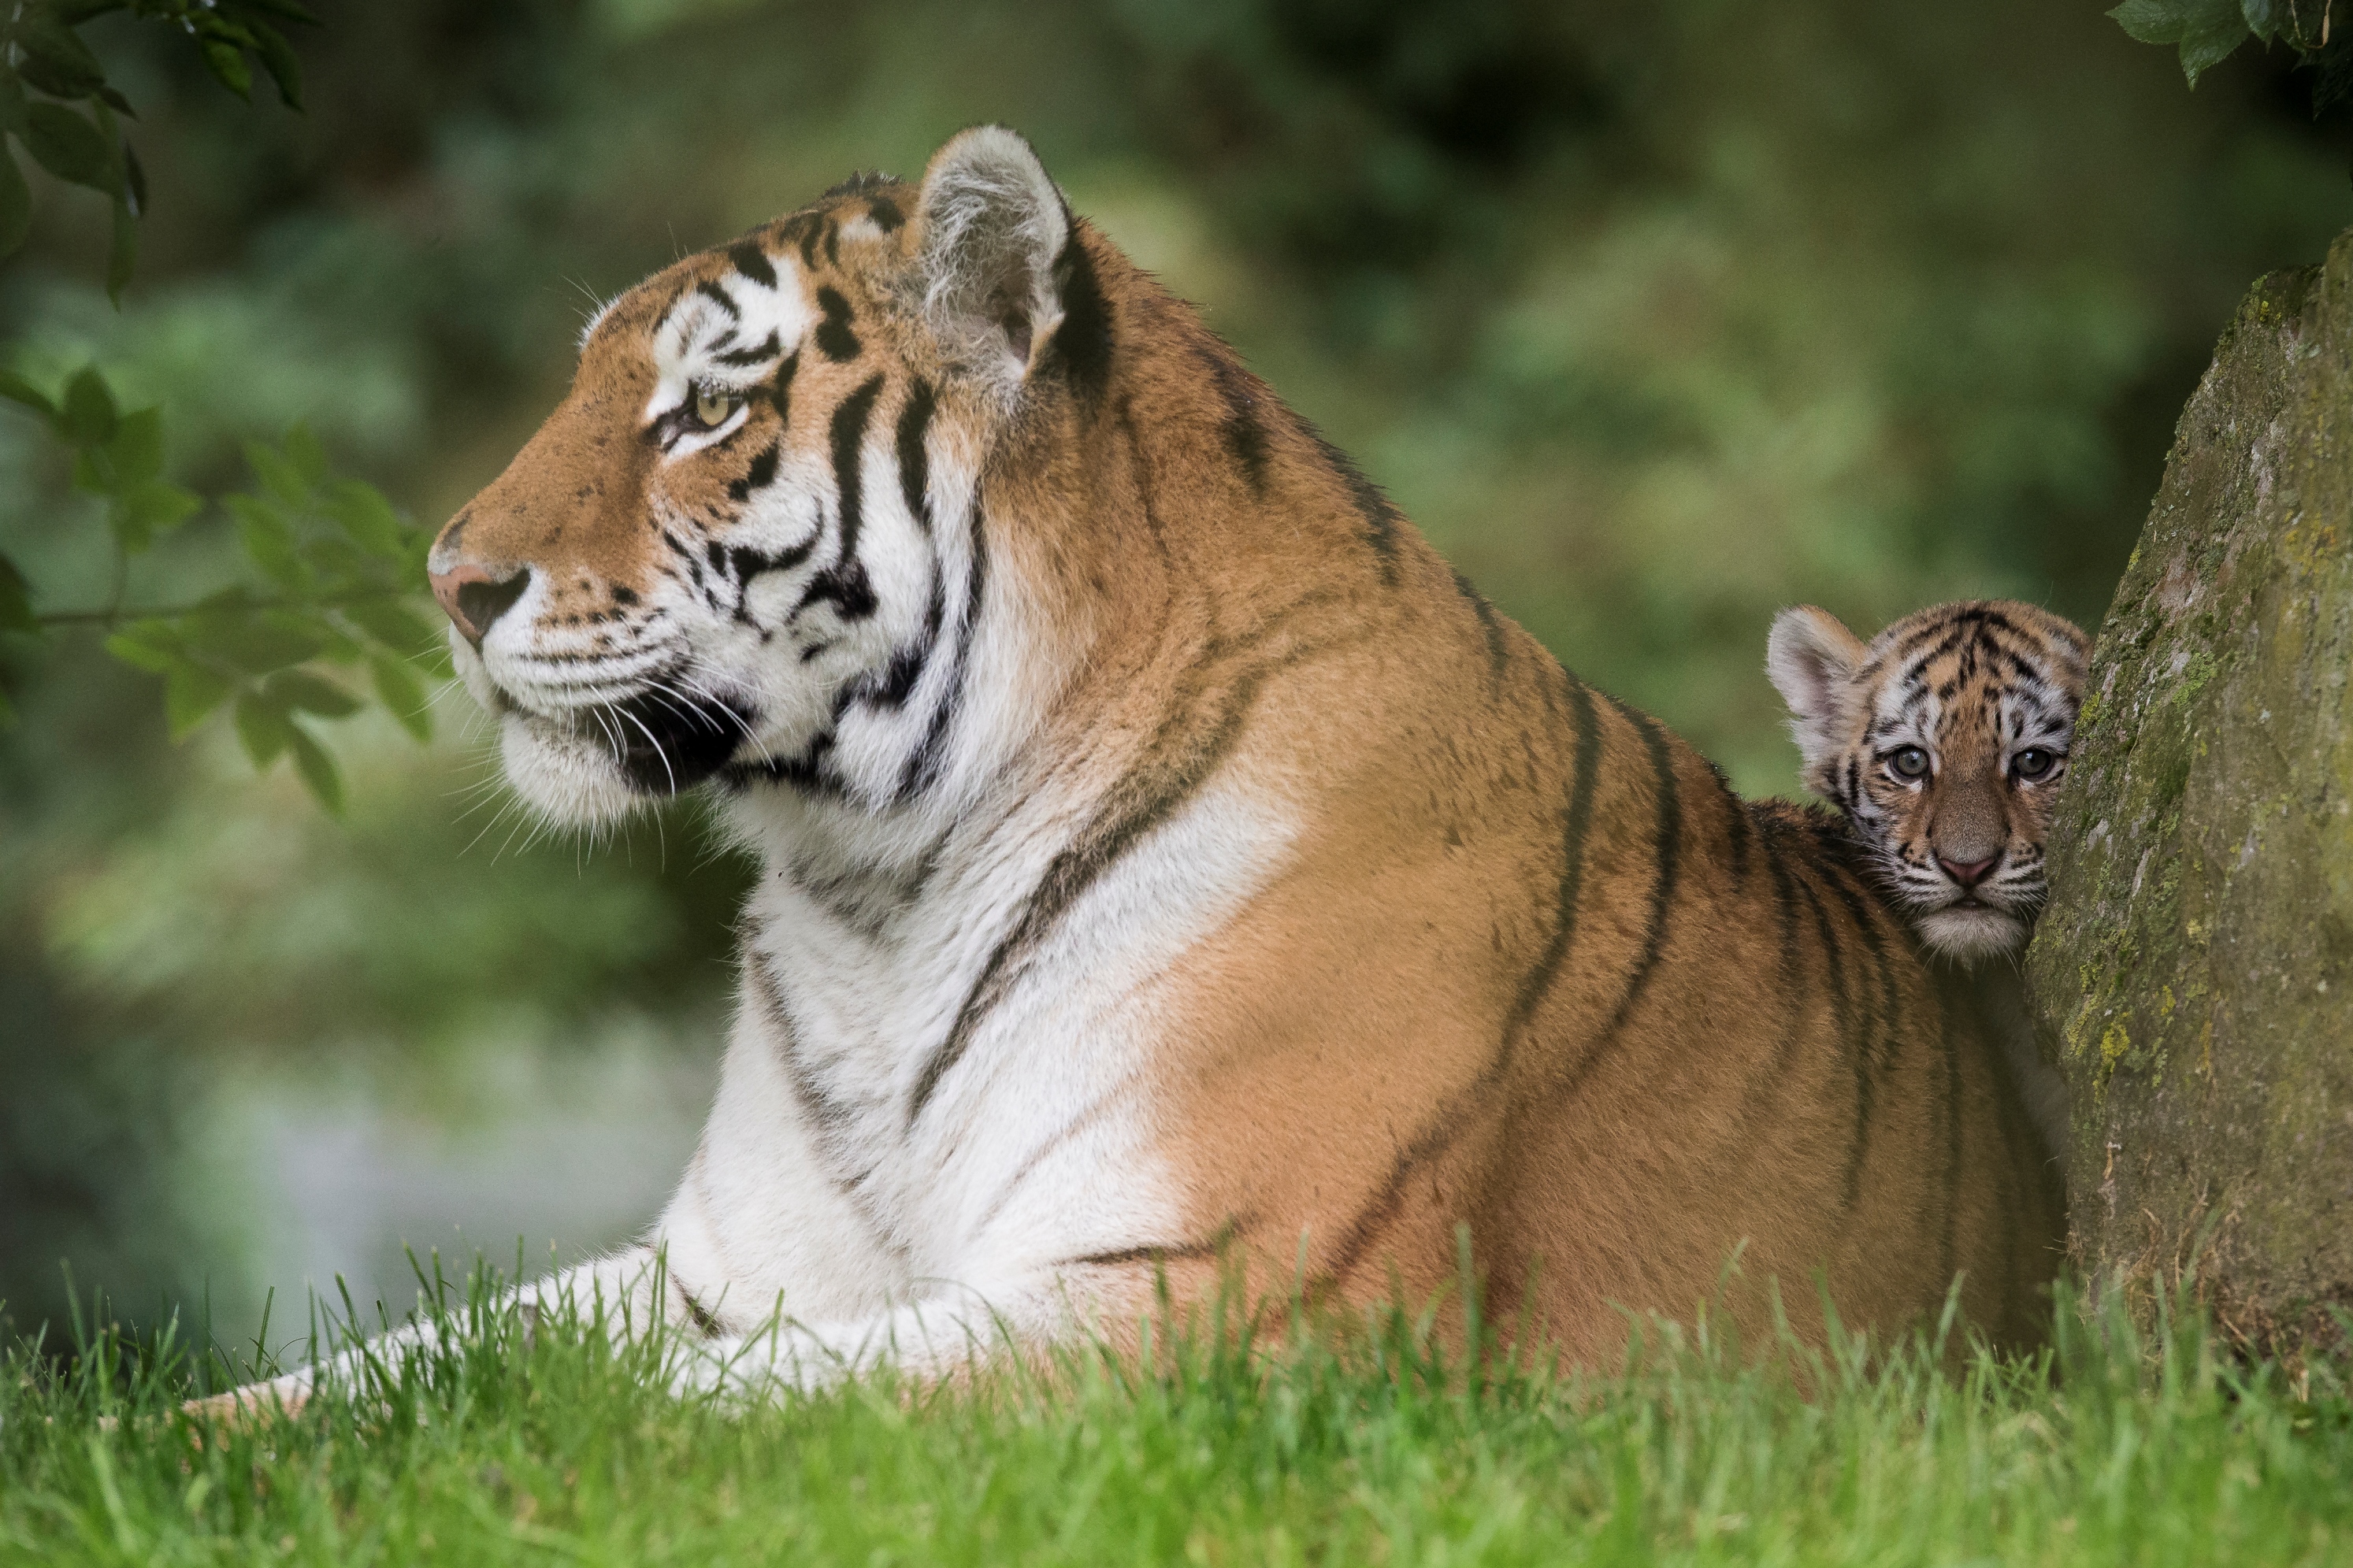 UPDATE! Our tiger cubs have been named!, at The Zoo